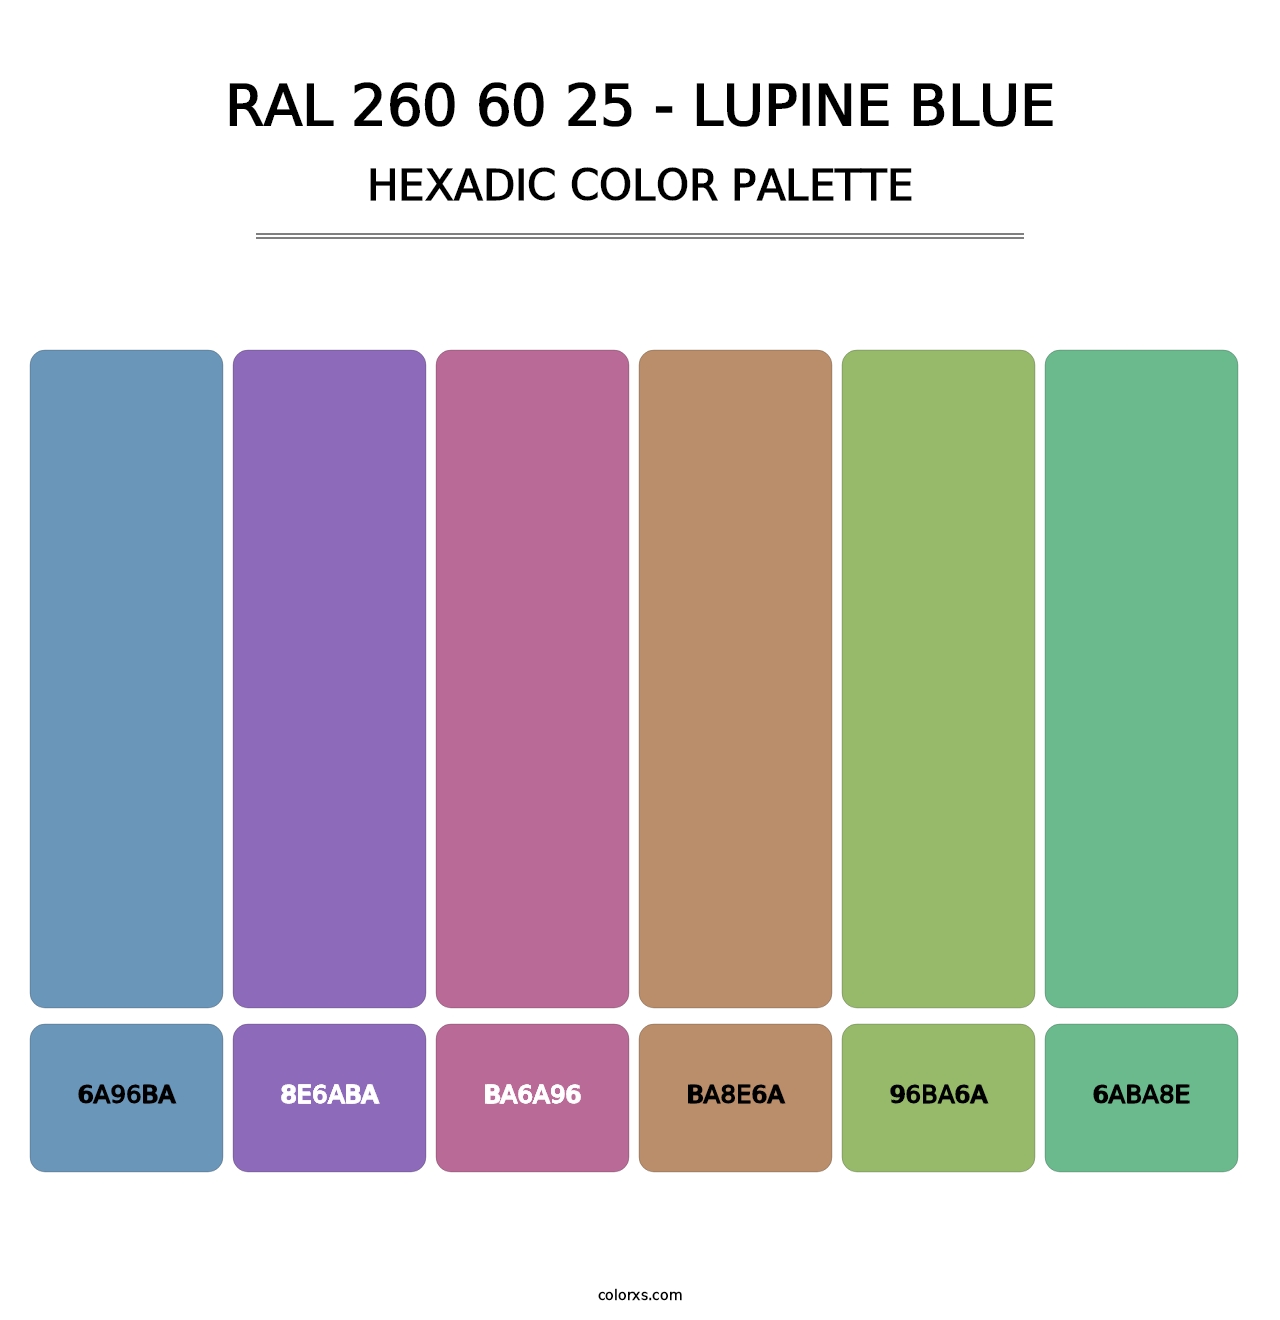 RAL 260 60 25 - Lupine Blue - Hexadic Color Palette